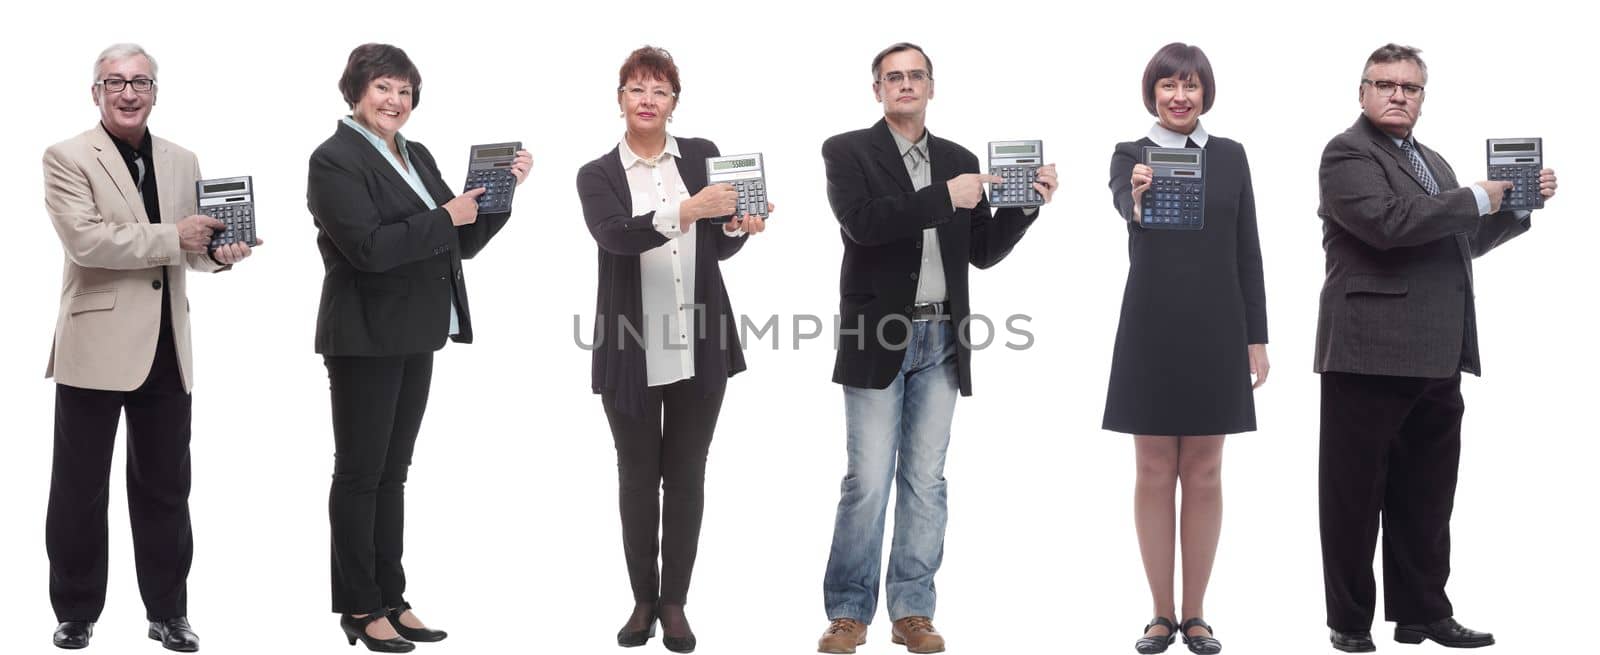 collage of people demonstrate calculator in hand isolated on white background